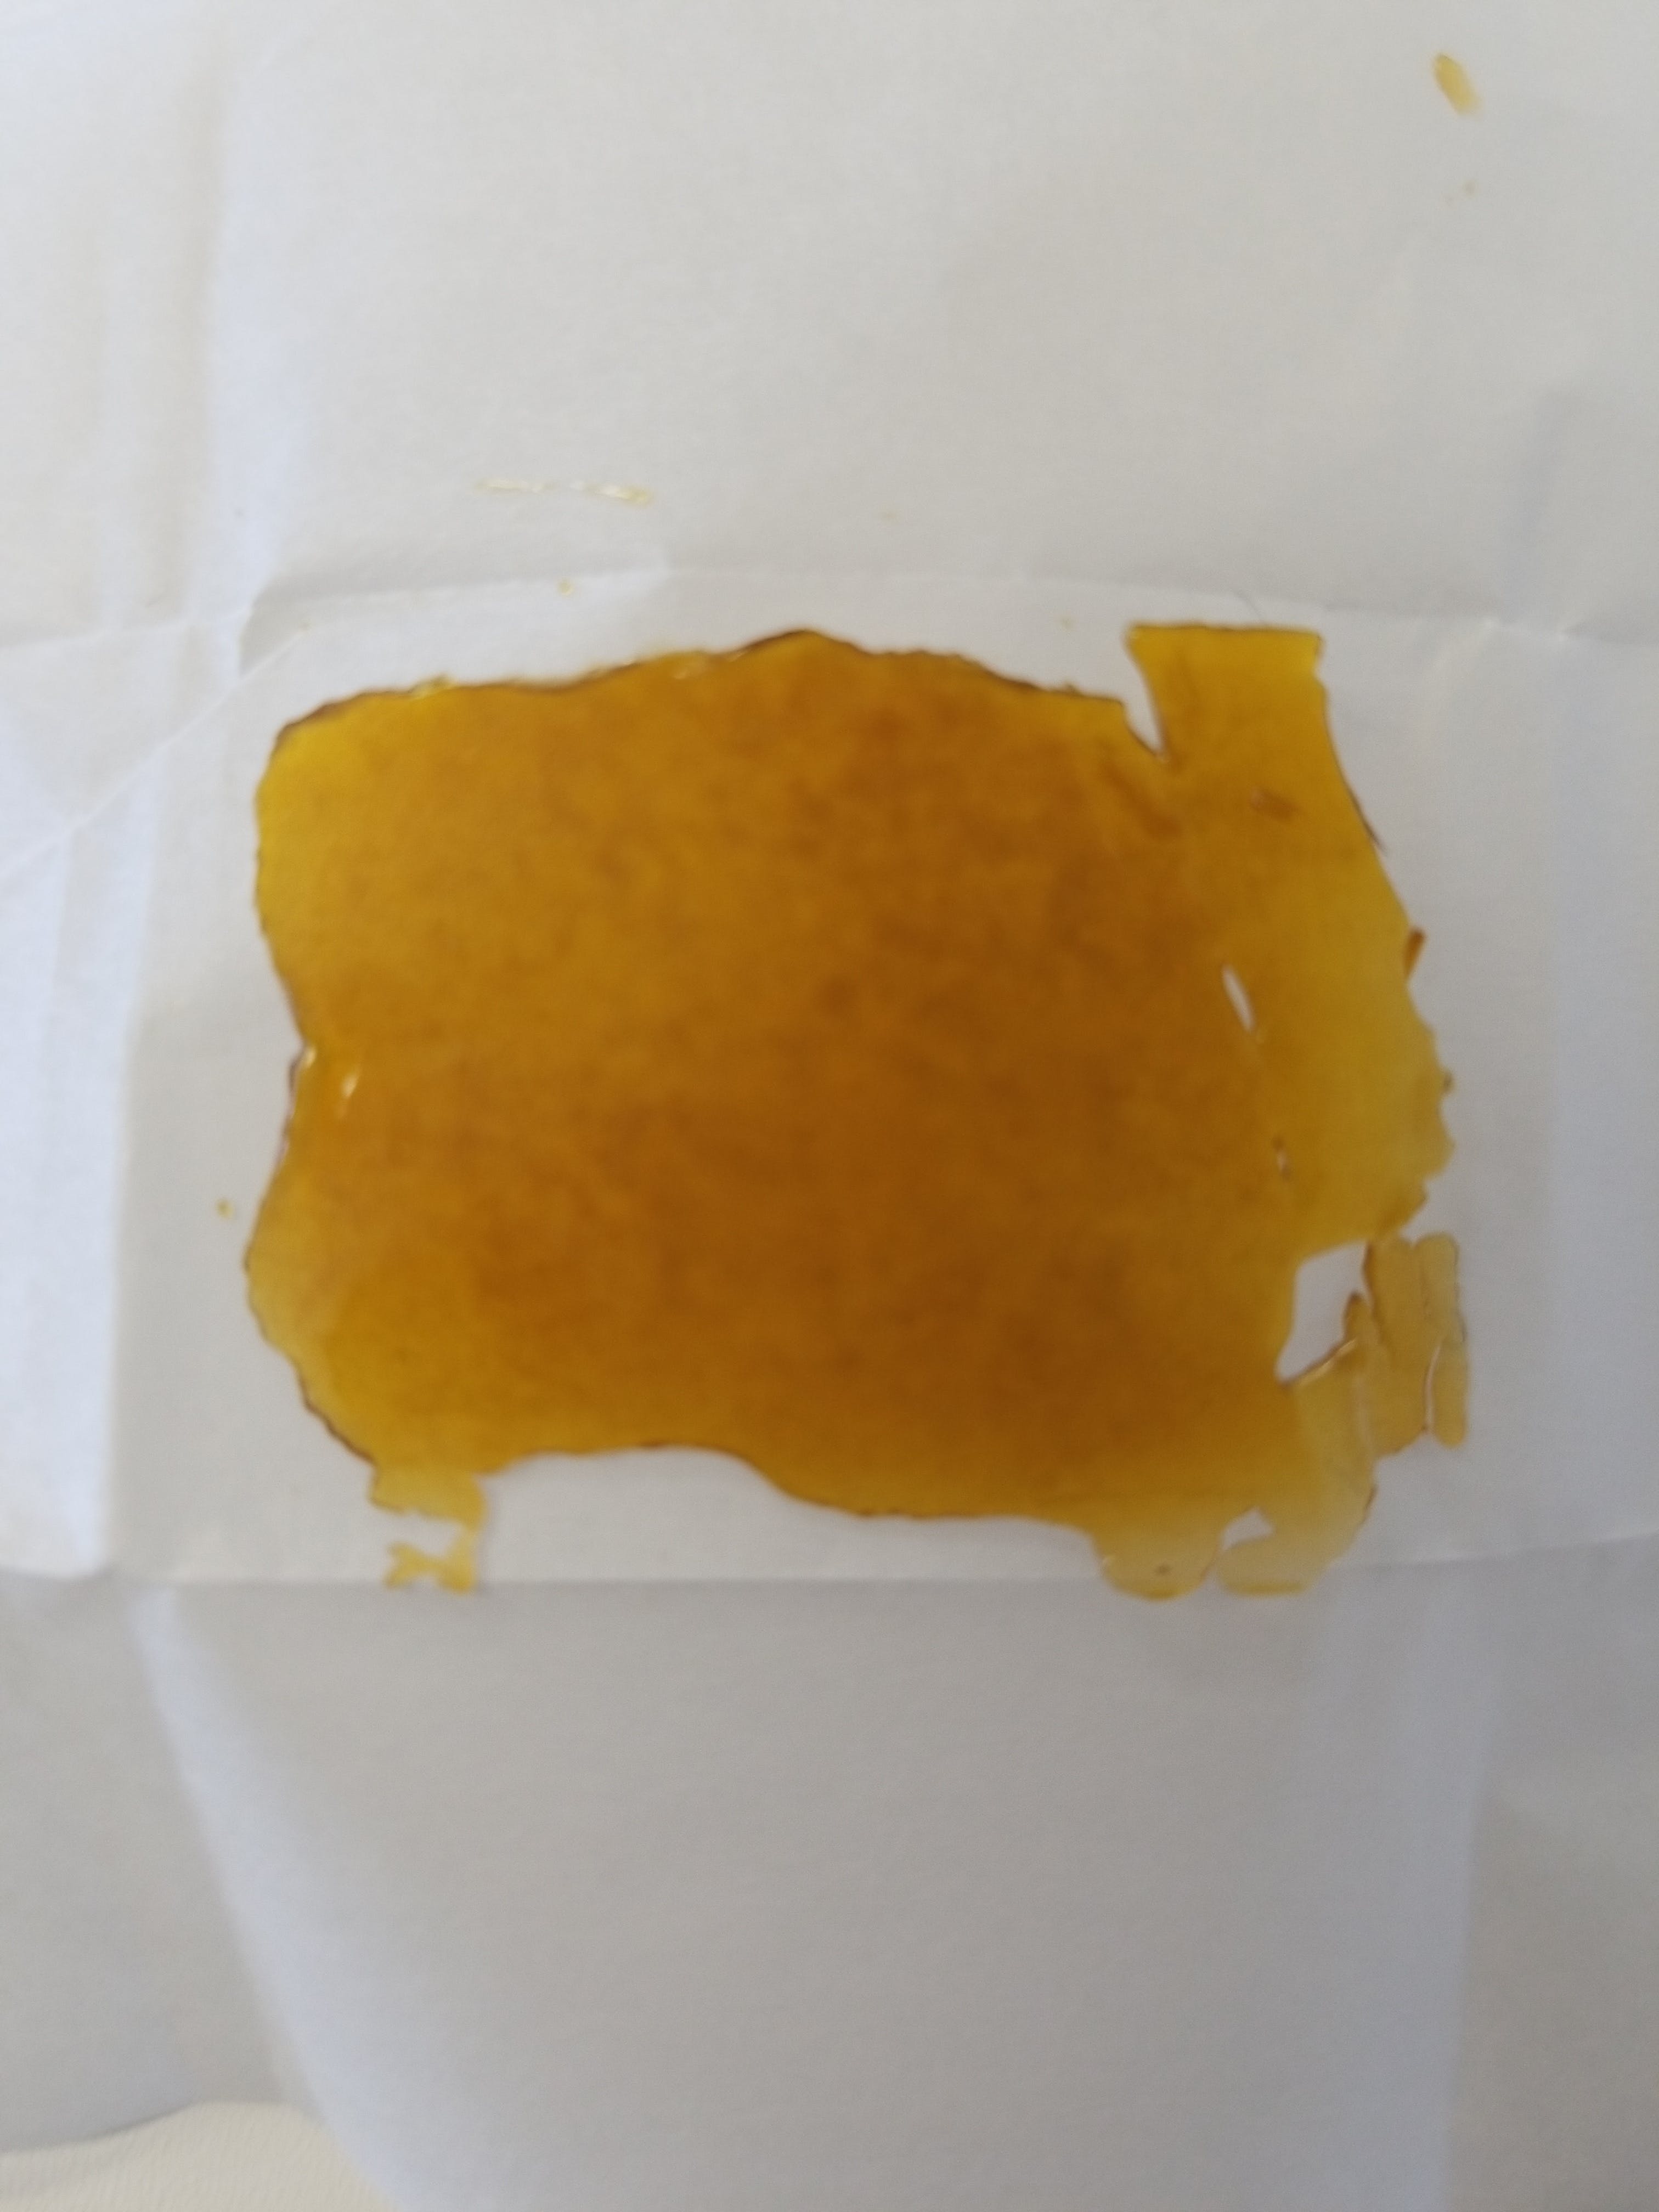 concentrate-720-house-shatter-12g-various-flavors